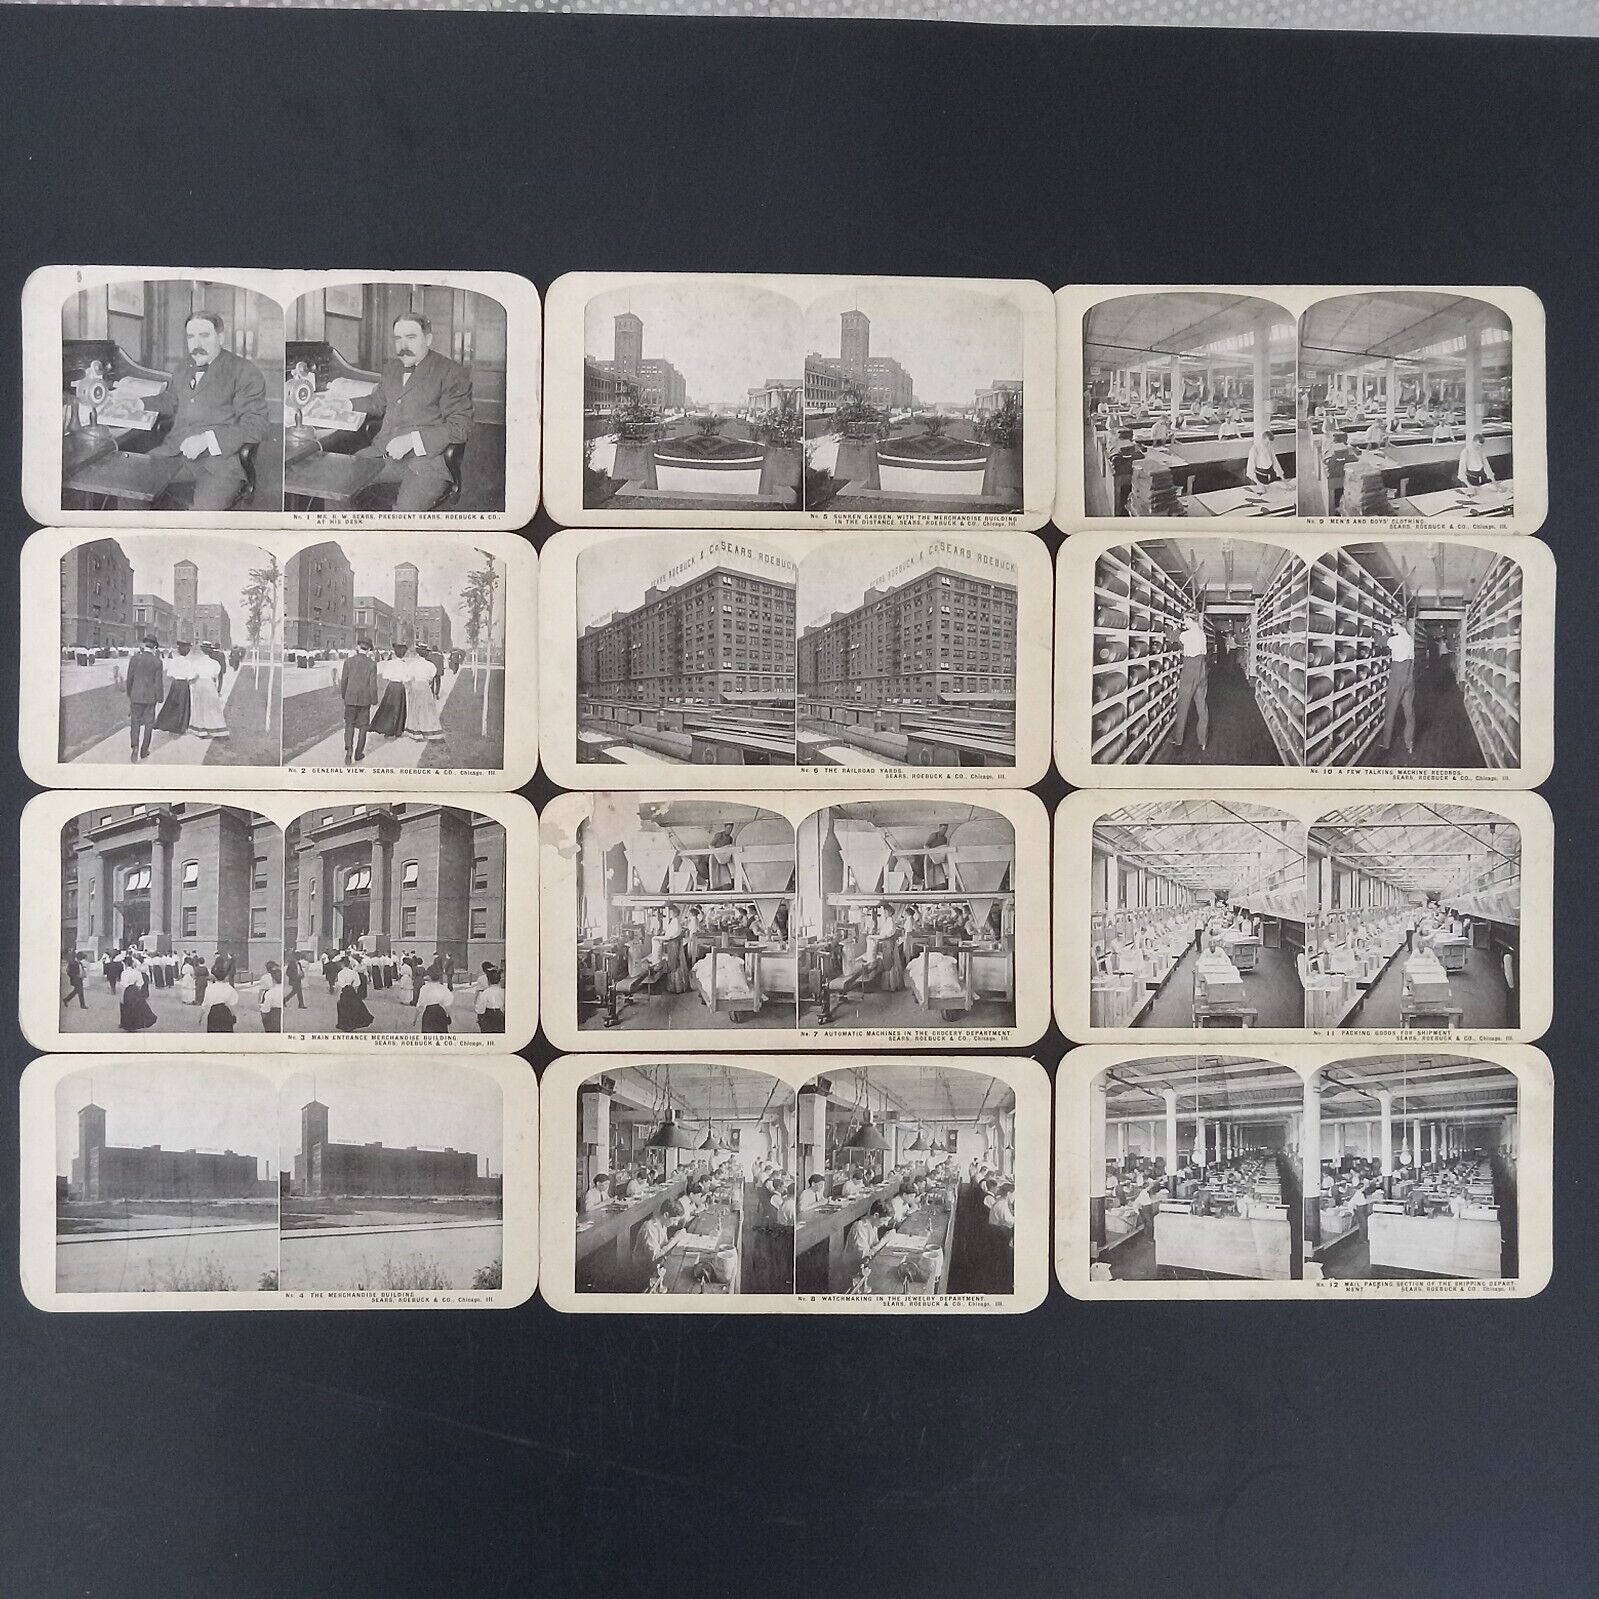 Sears Roebuck Chicago Illinois Town Factory Campus Stereoscope Cards 47pc c1904